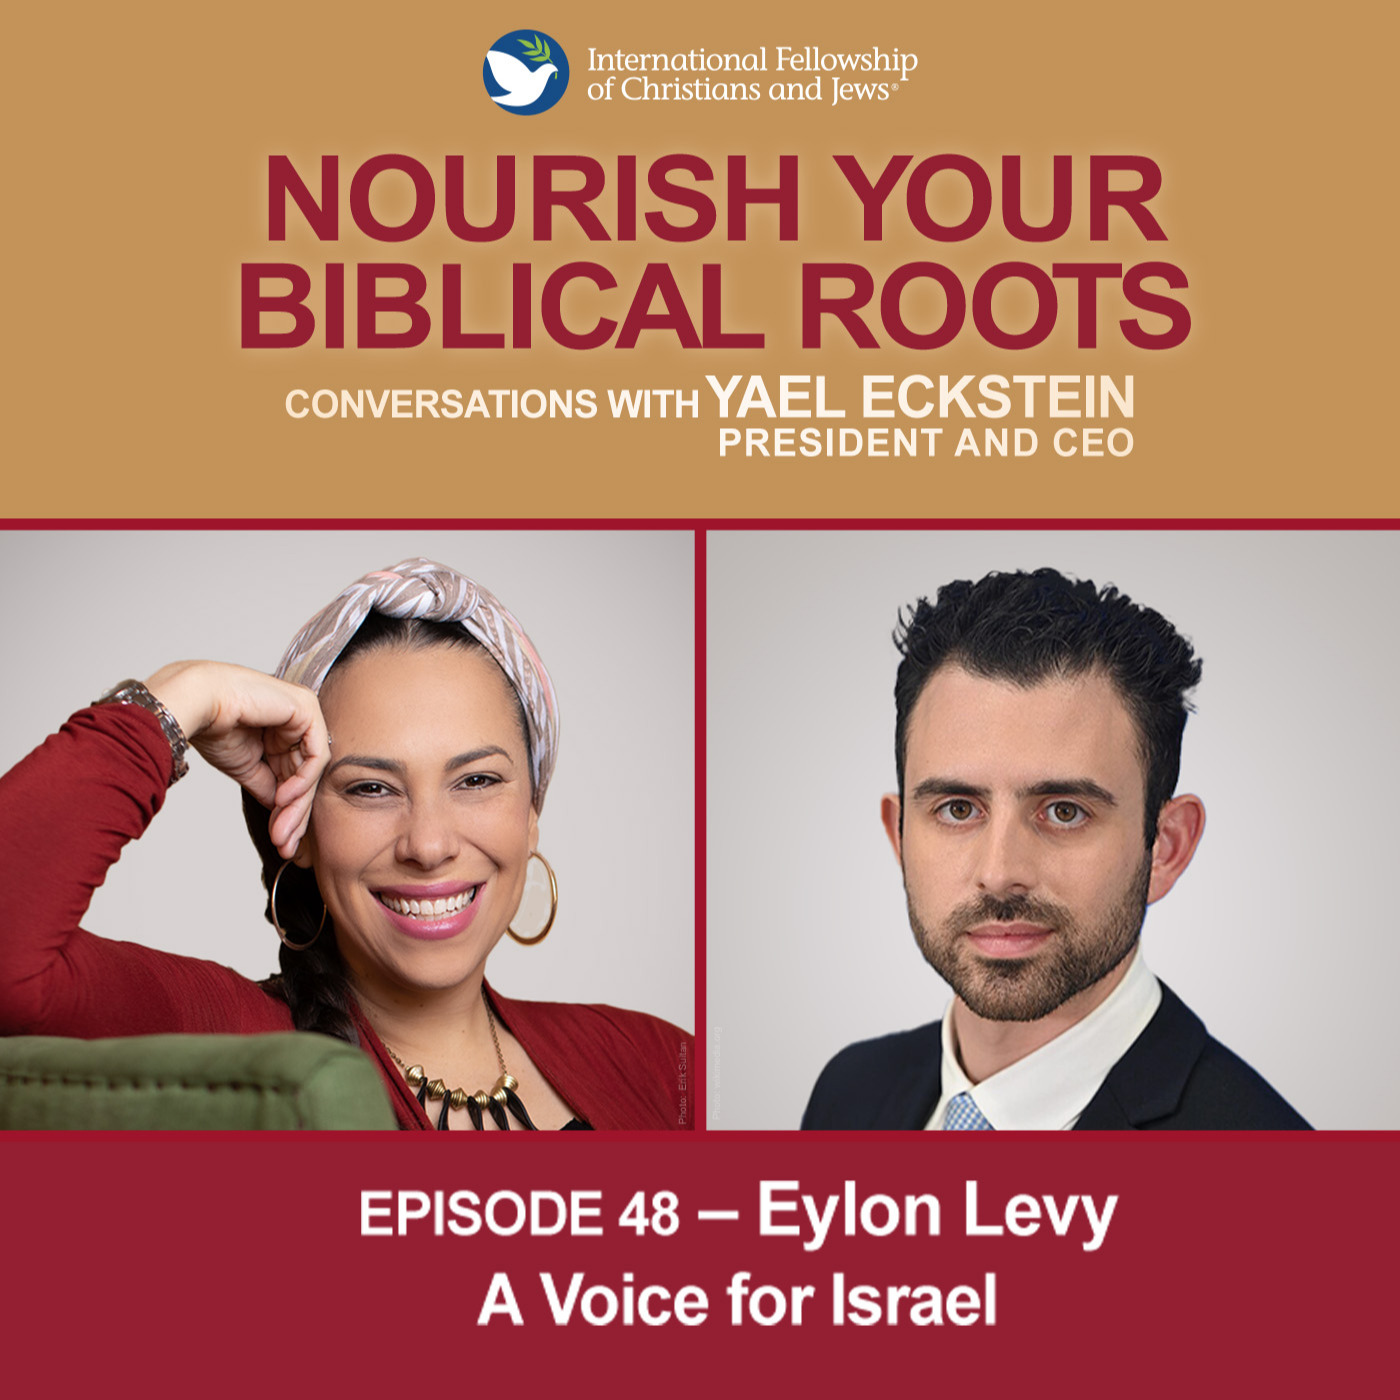 A Voice for Israel — A Conversation with Eylon Levy